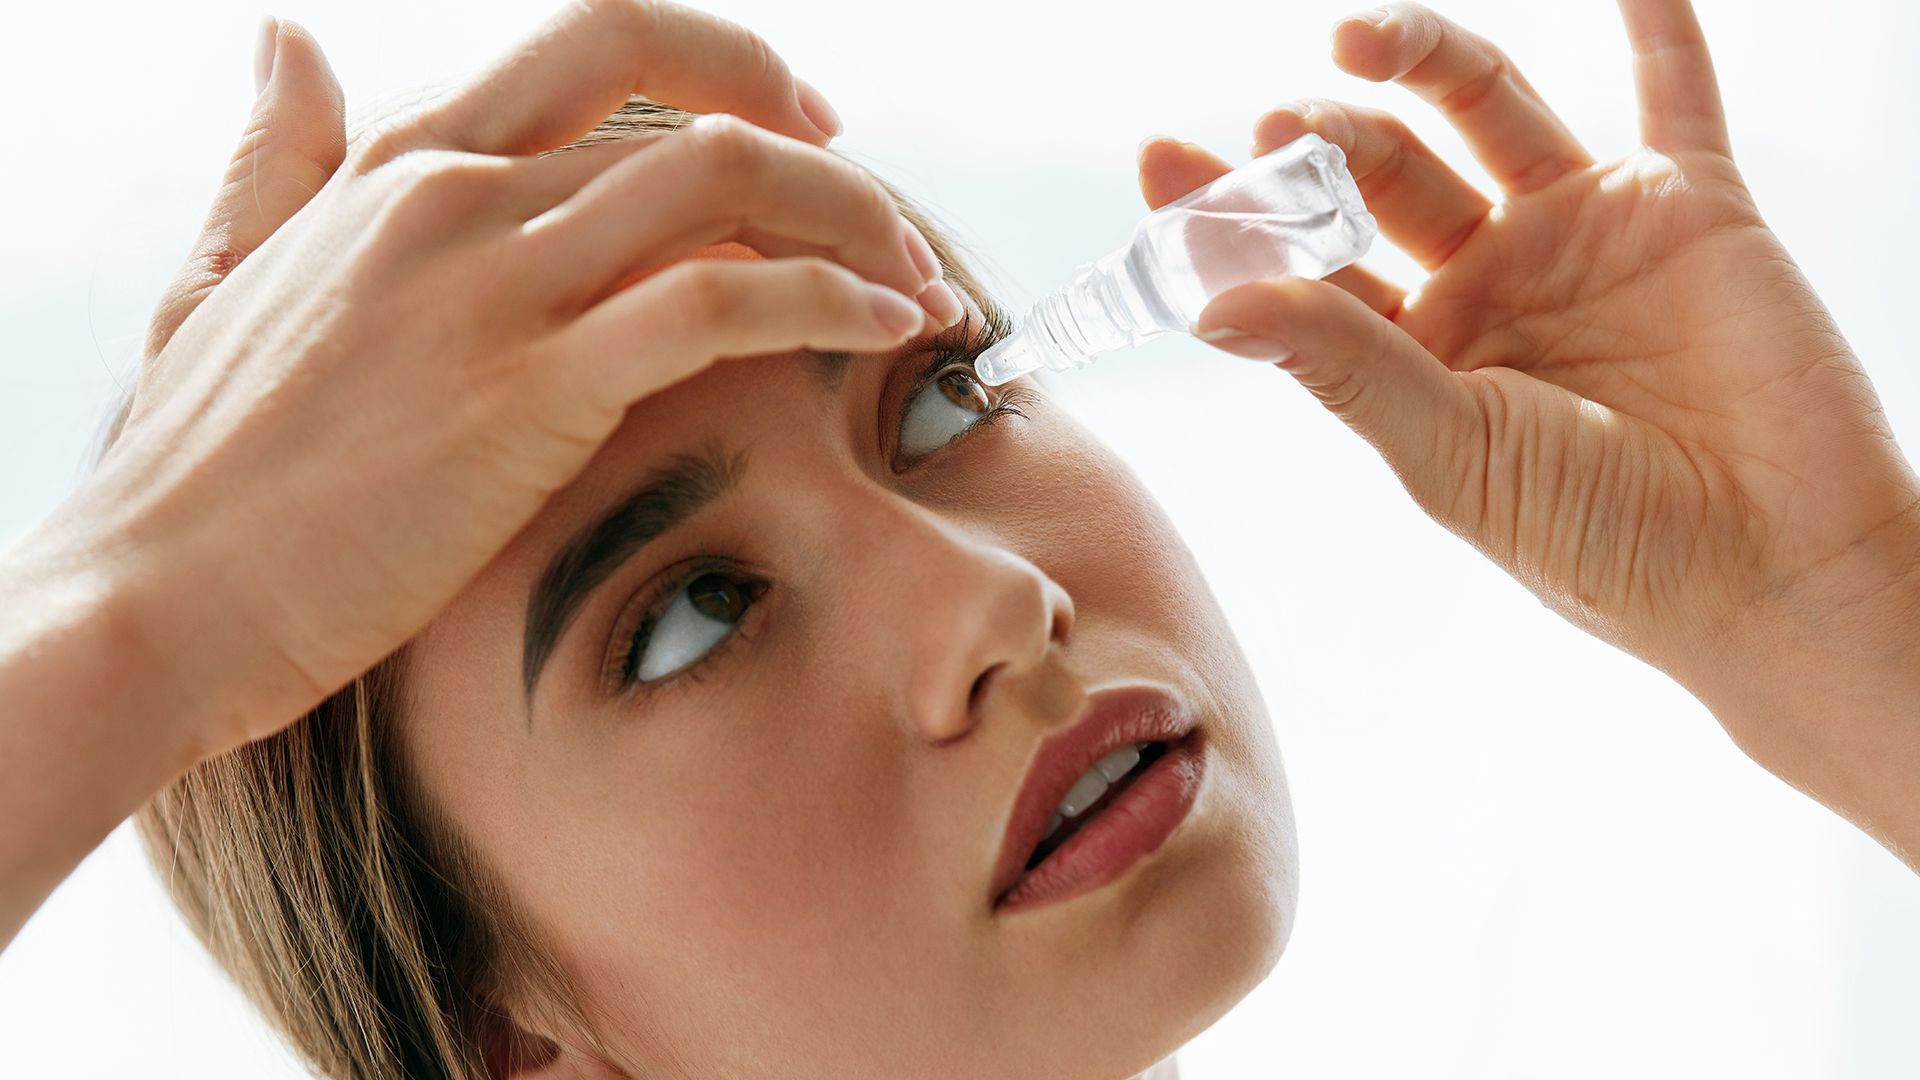 Best Contact Lens Solution for Dry Eyes